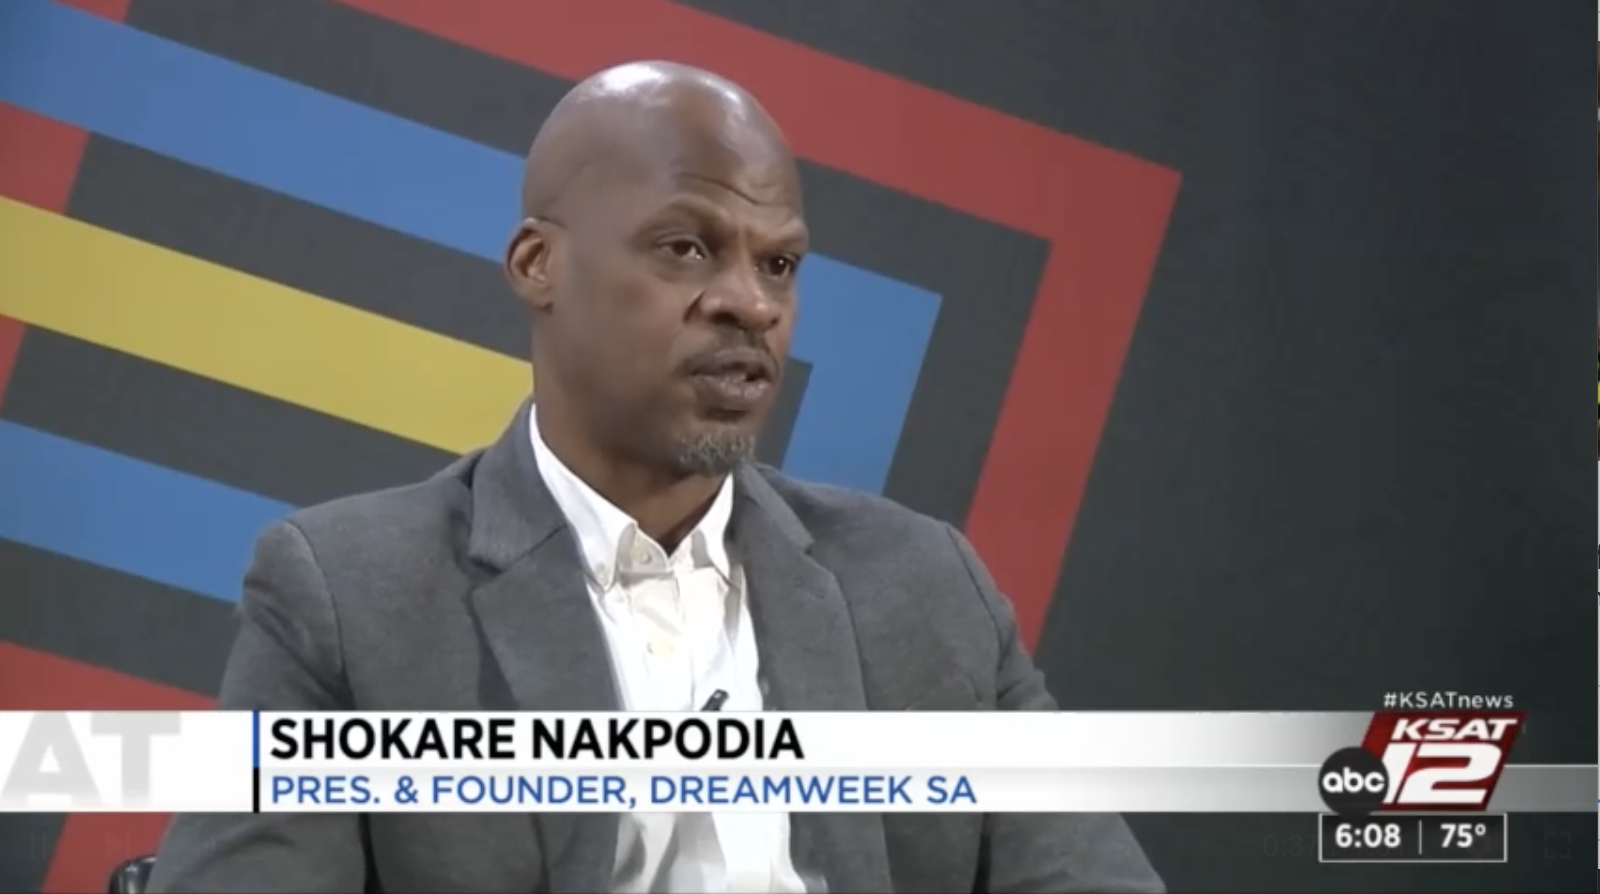 DreamWeek SA founder wanted to join civil rights movement while growing up